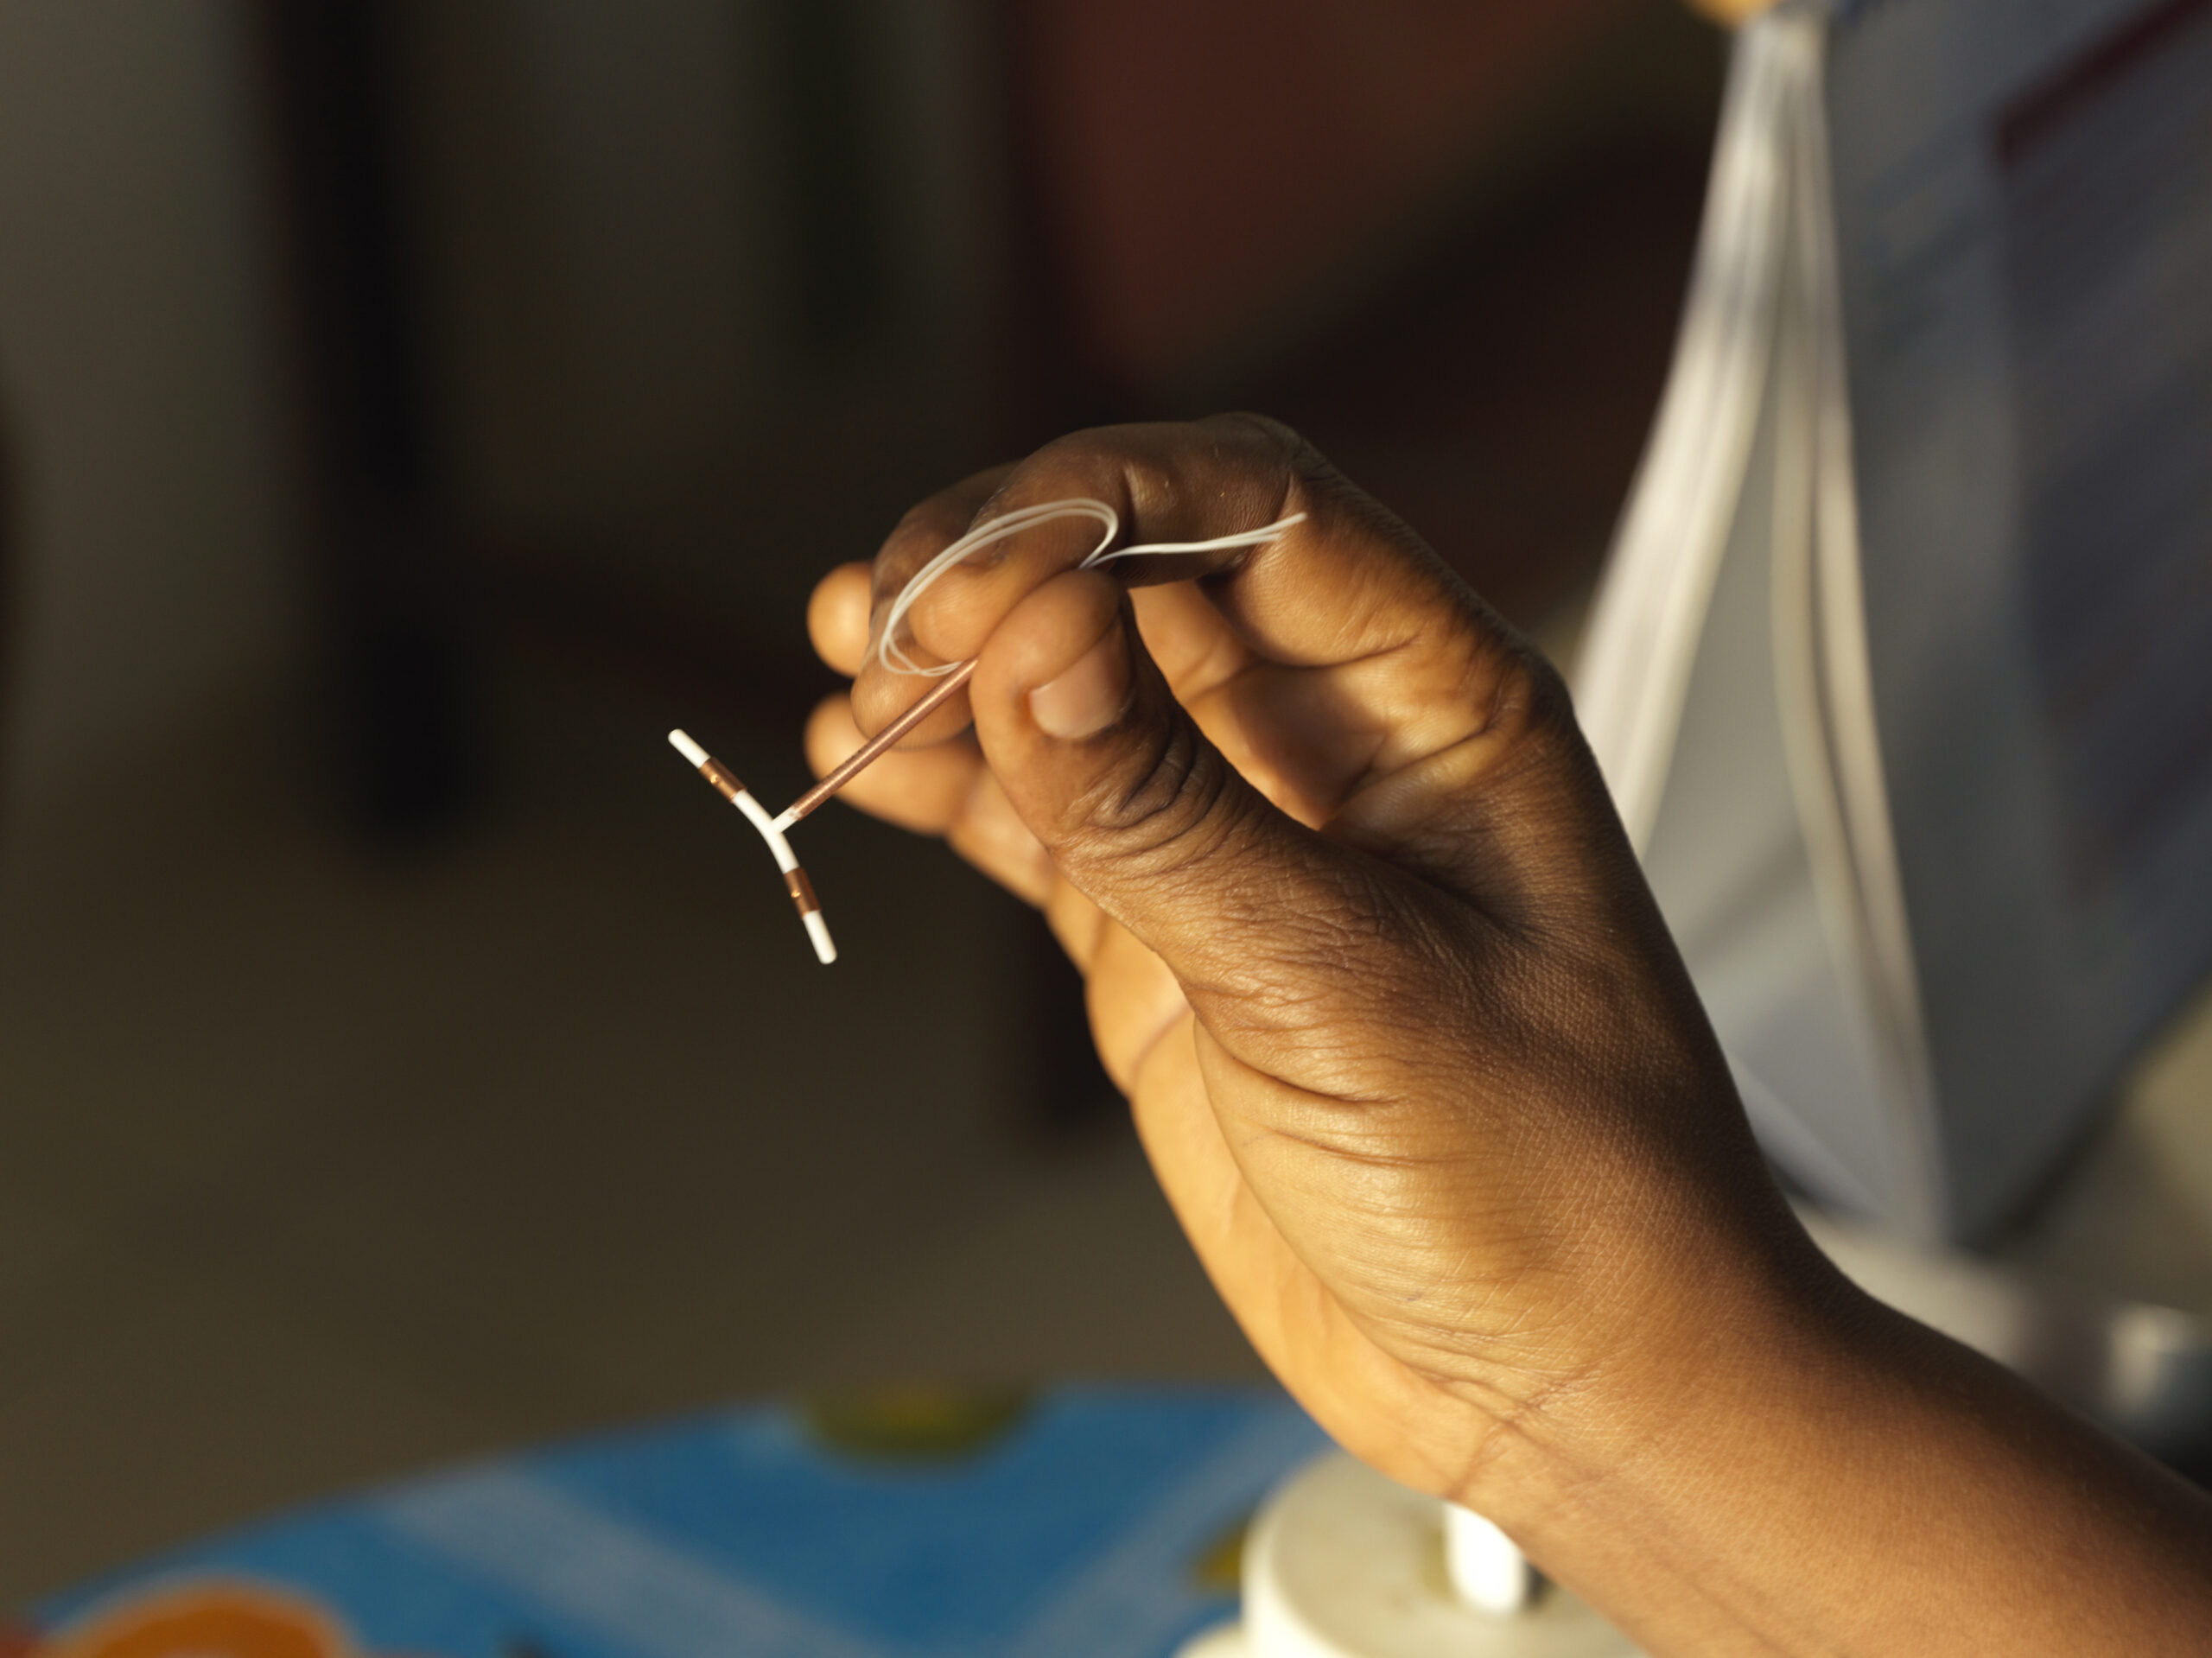 Ghana includes contraceptive services in the national benefits package